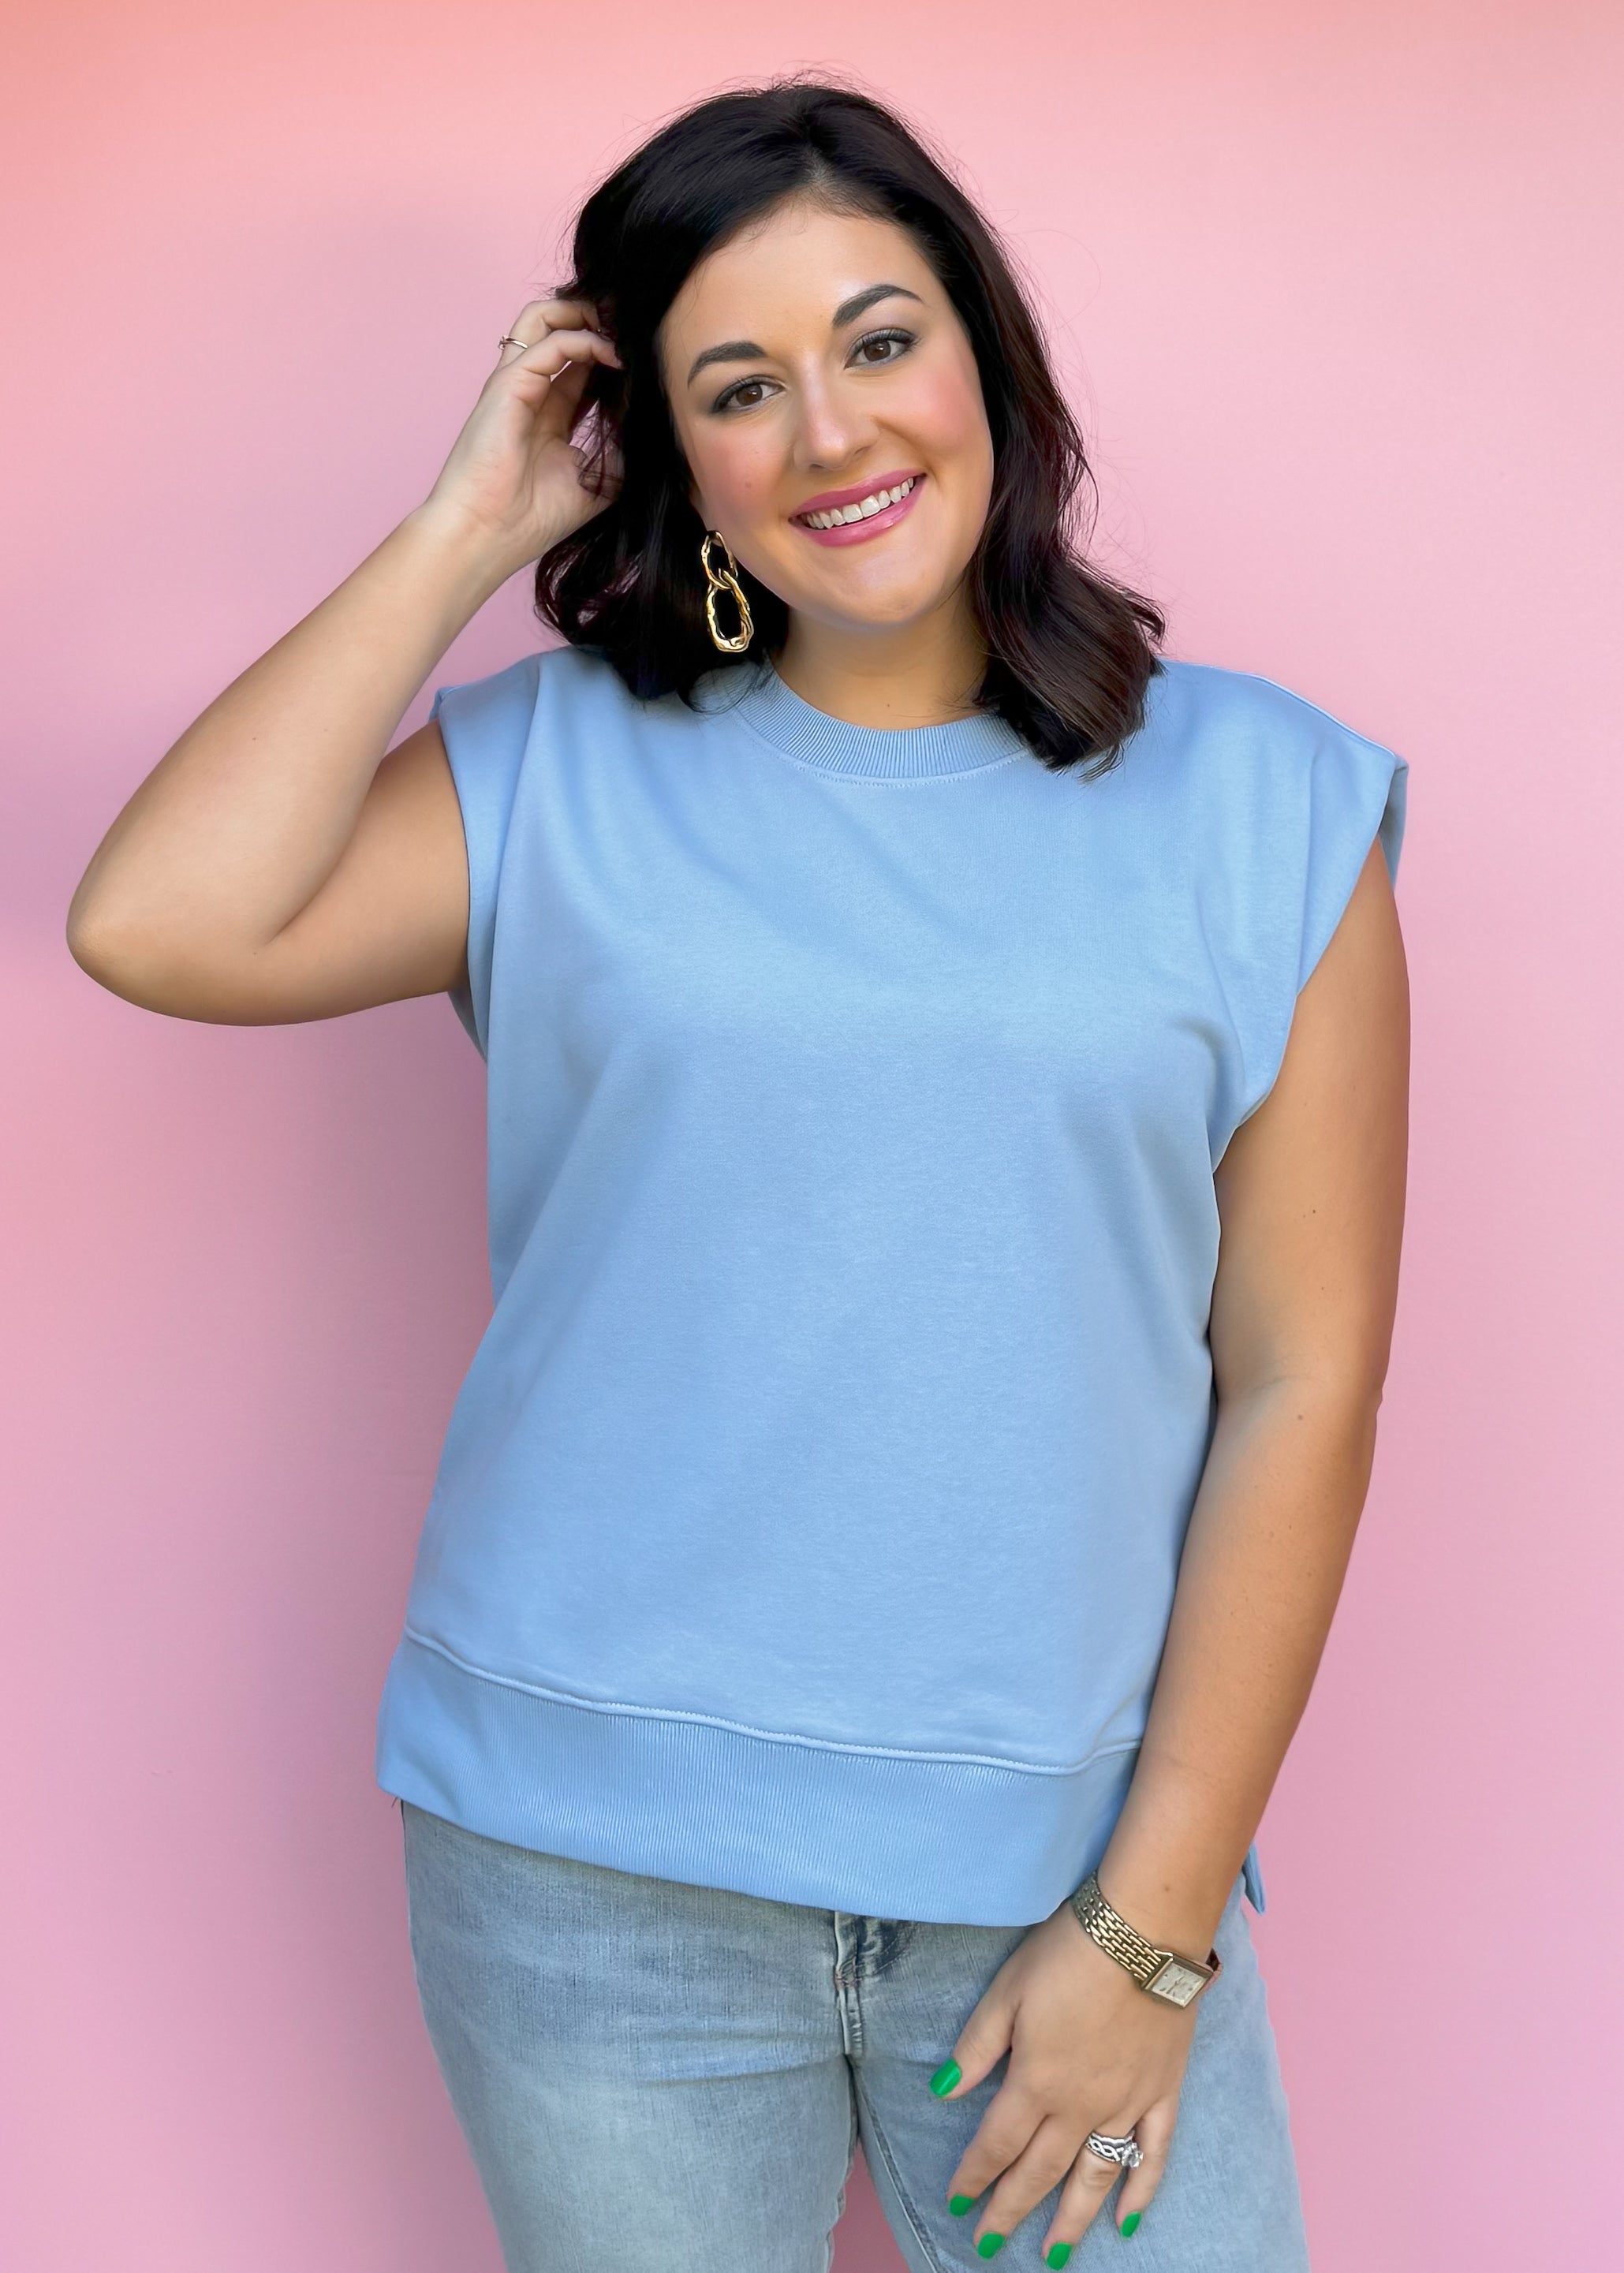 Wesley Cap Sleeve Top, Chambray Blue